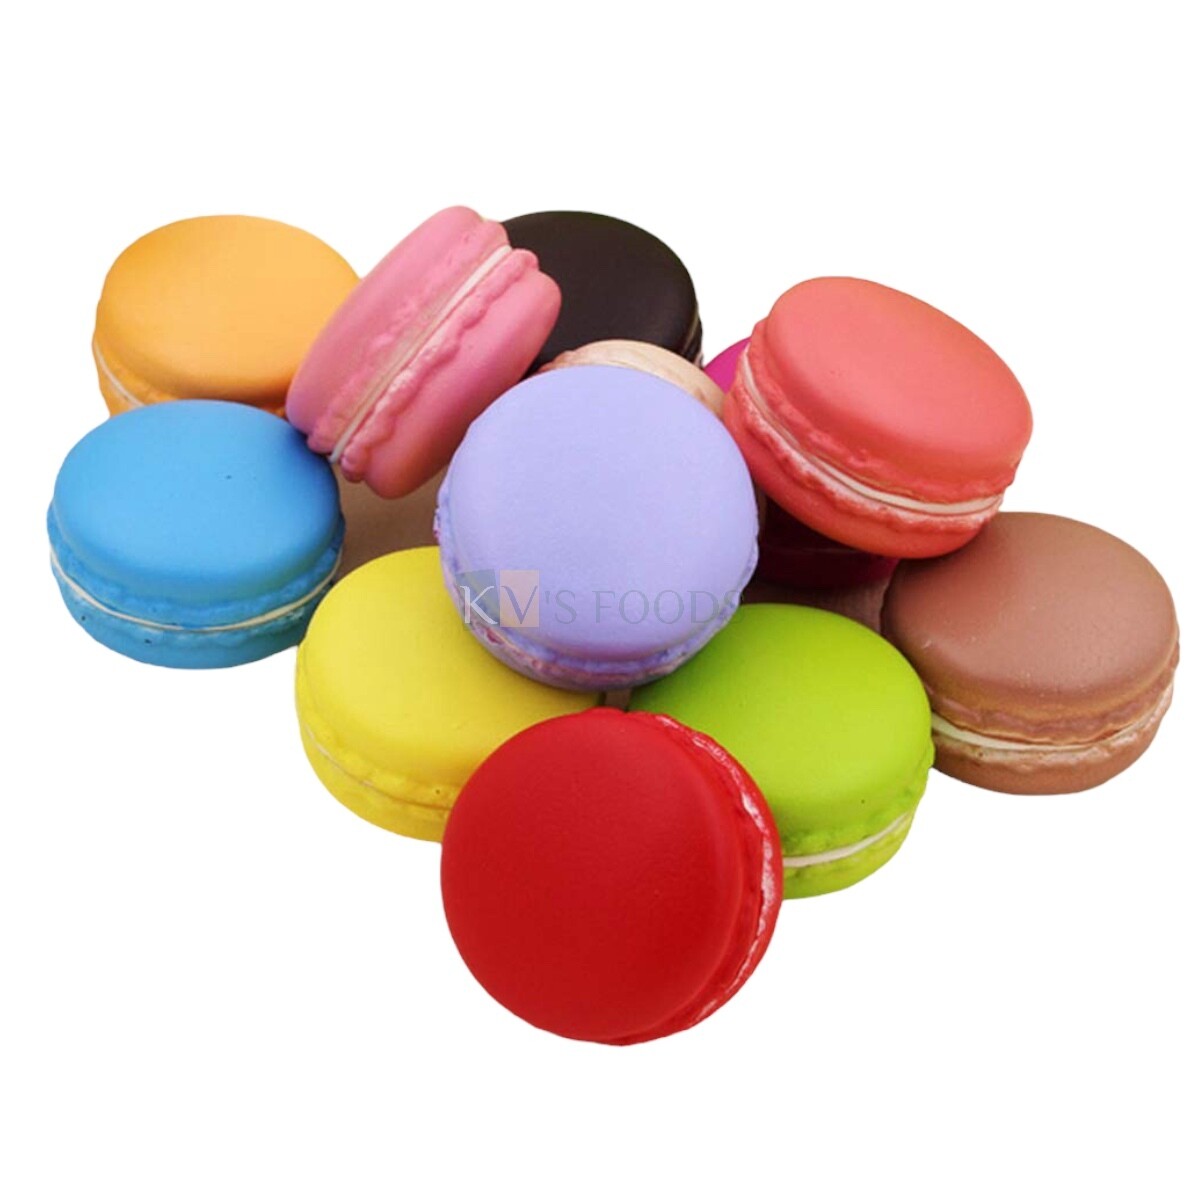 6PC Multicoloured Non Edible Dummy French Macaroon lifelike Fake artificial simulate Macaron, DIY Decorate Materials, For Home Kitchen Shop Market Decoration, Play Toy, Learning photography props